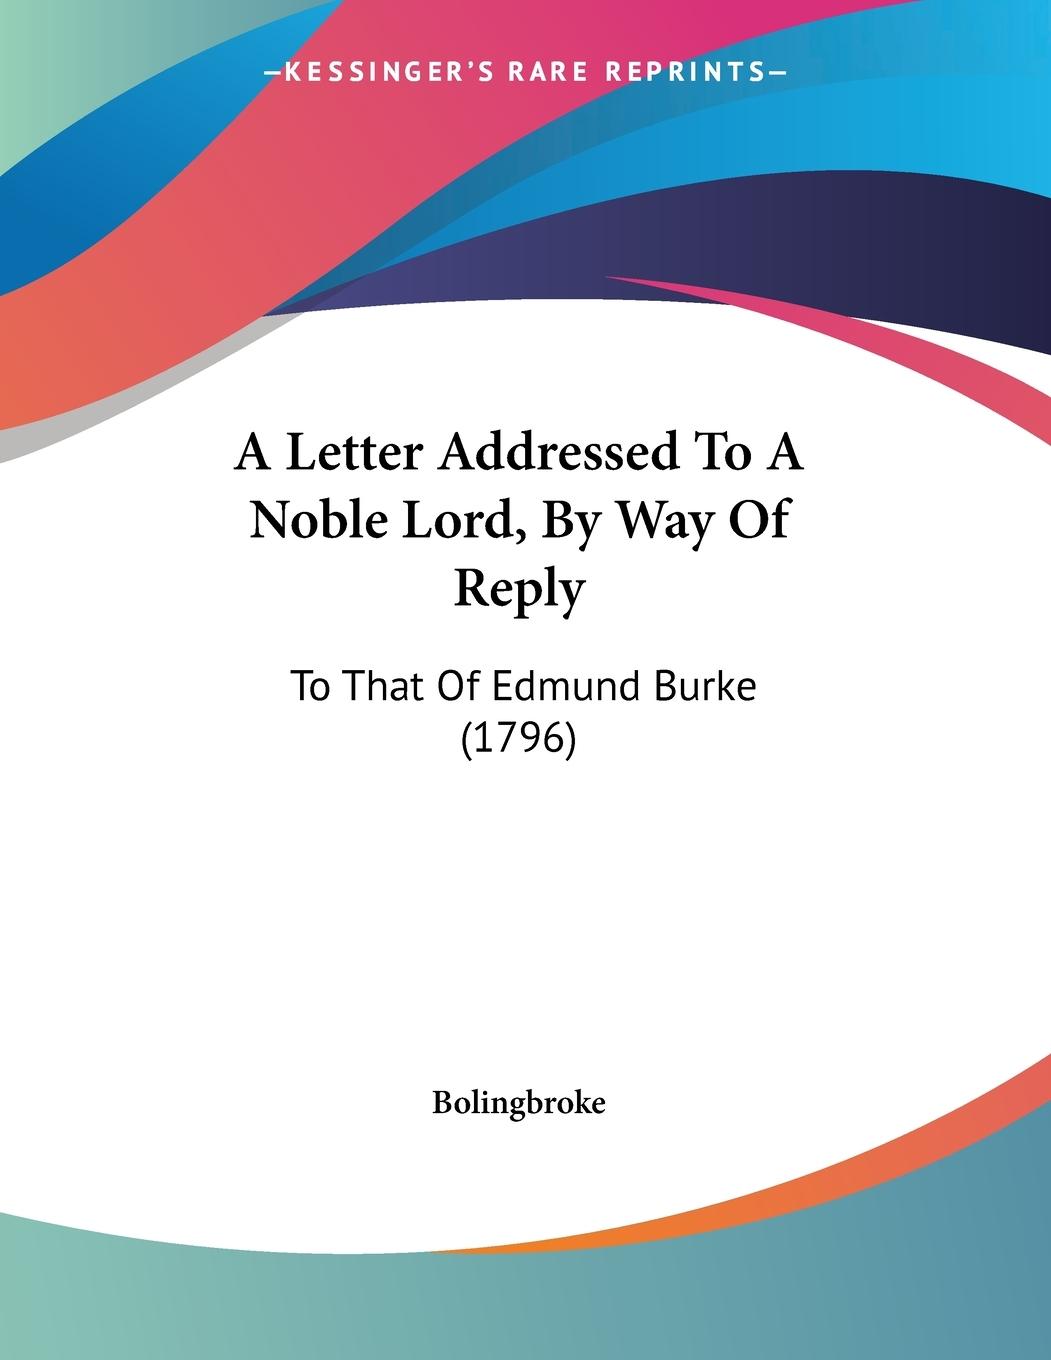 A Letter Addressed To A Noble Lord, By Way Of Reply - Bolingbroke